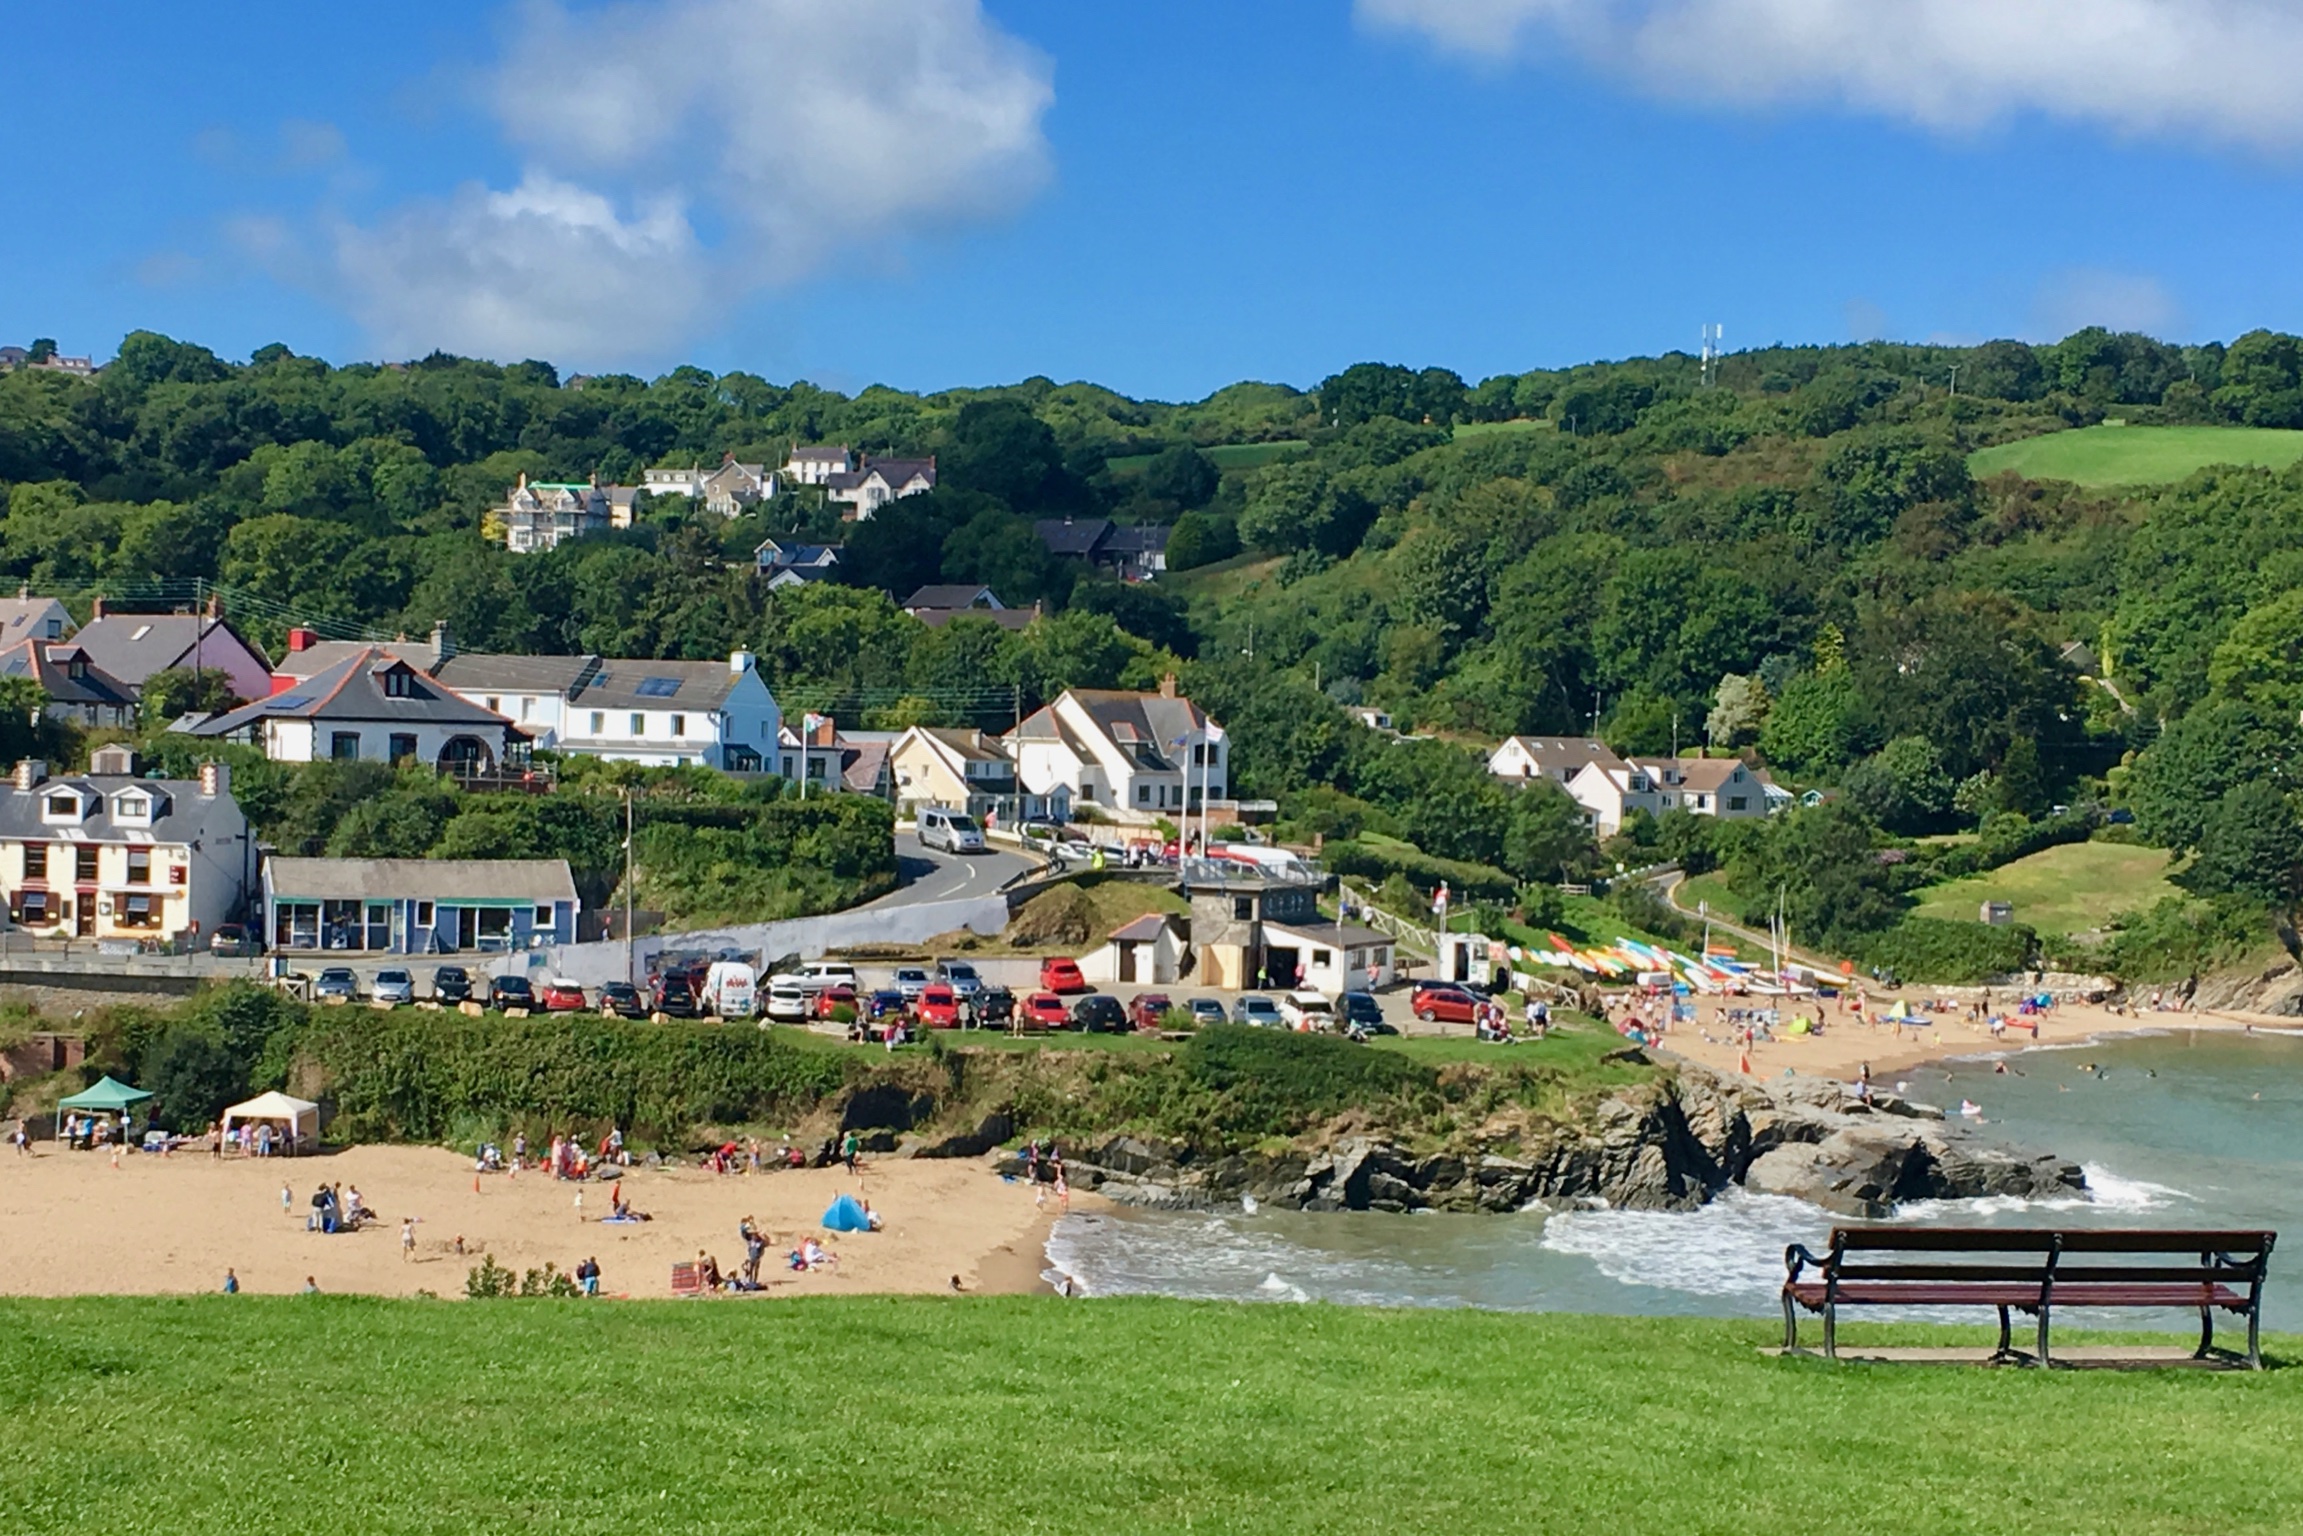 The two beaches of Aberporth